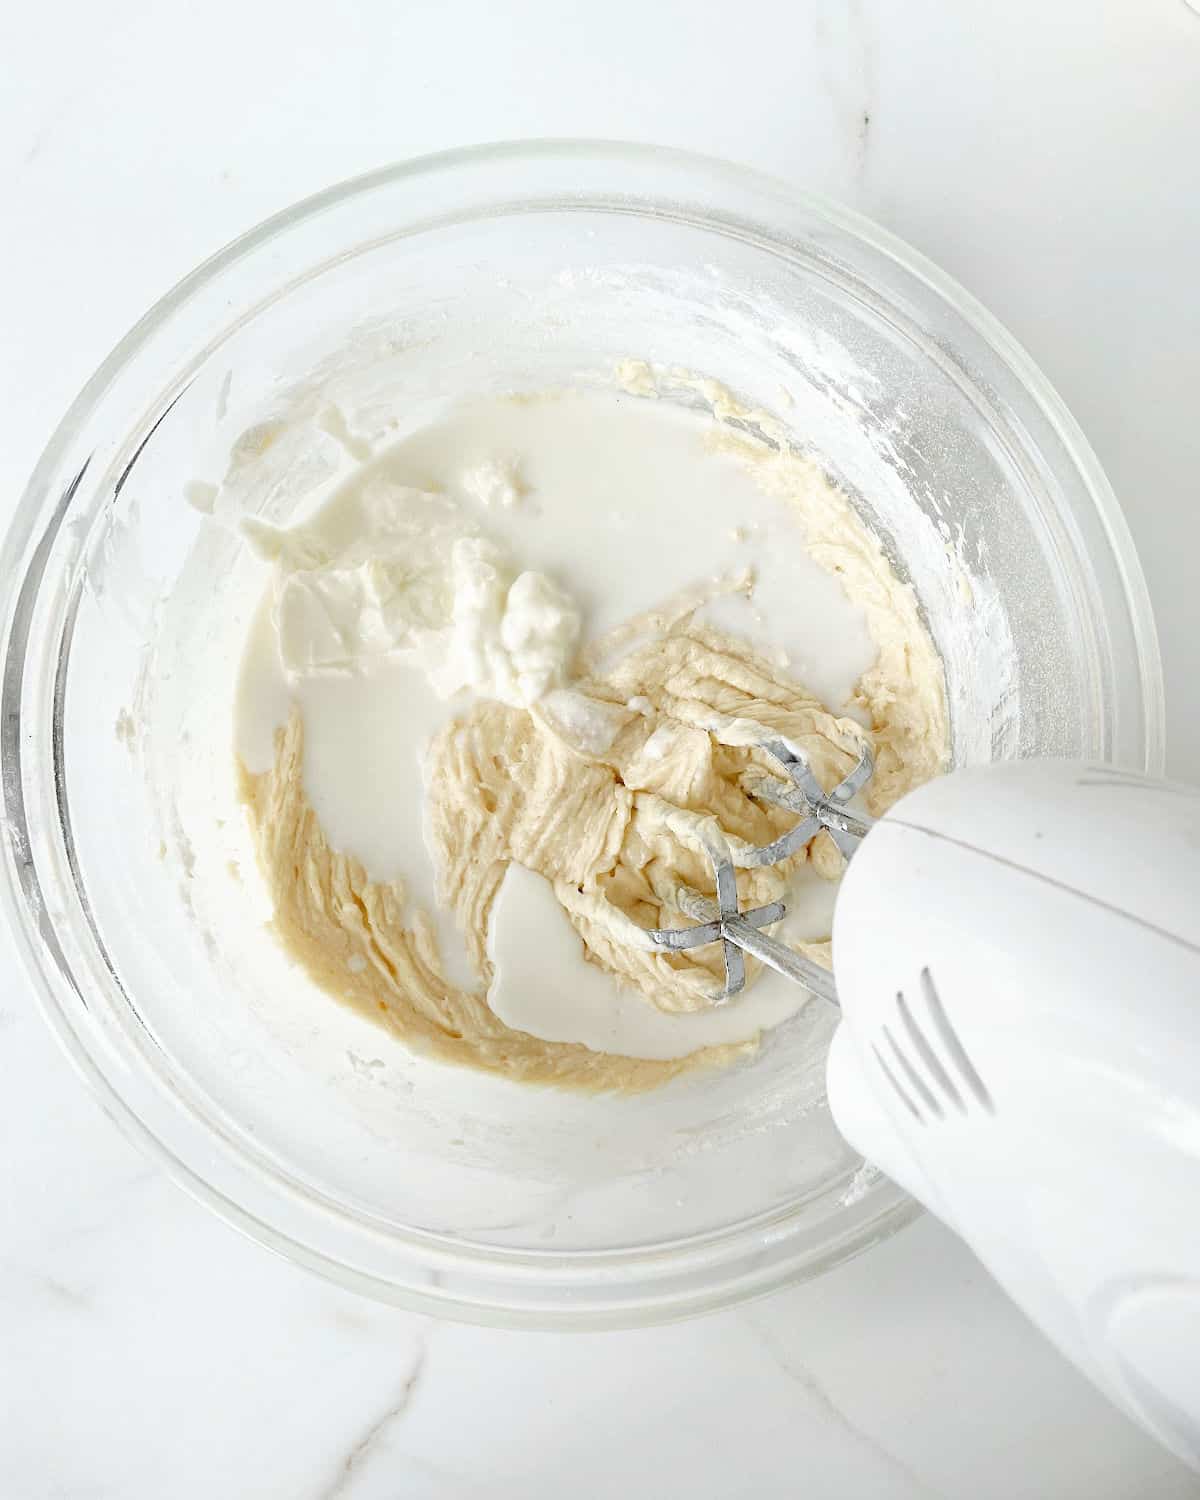 Milk and sour cream added to cake batter in a glass bowl with an electric mixer. White marble surface.